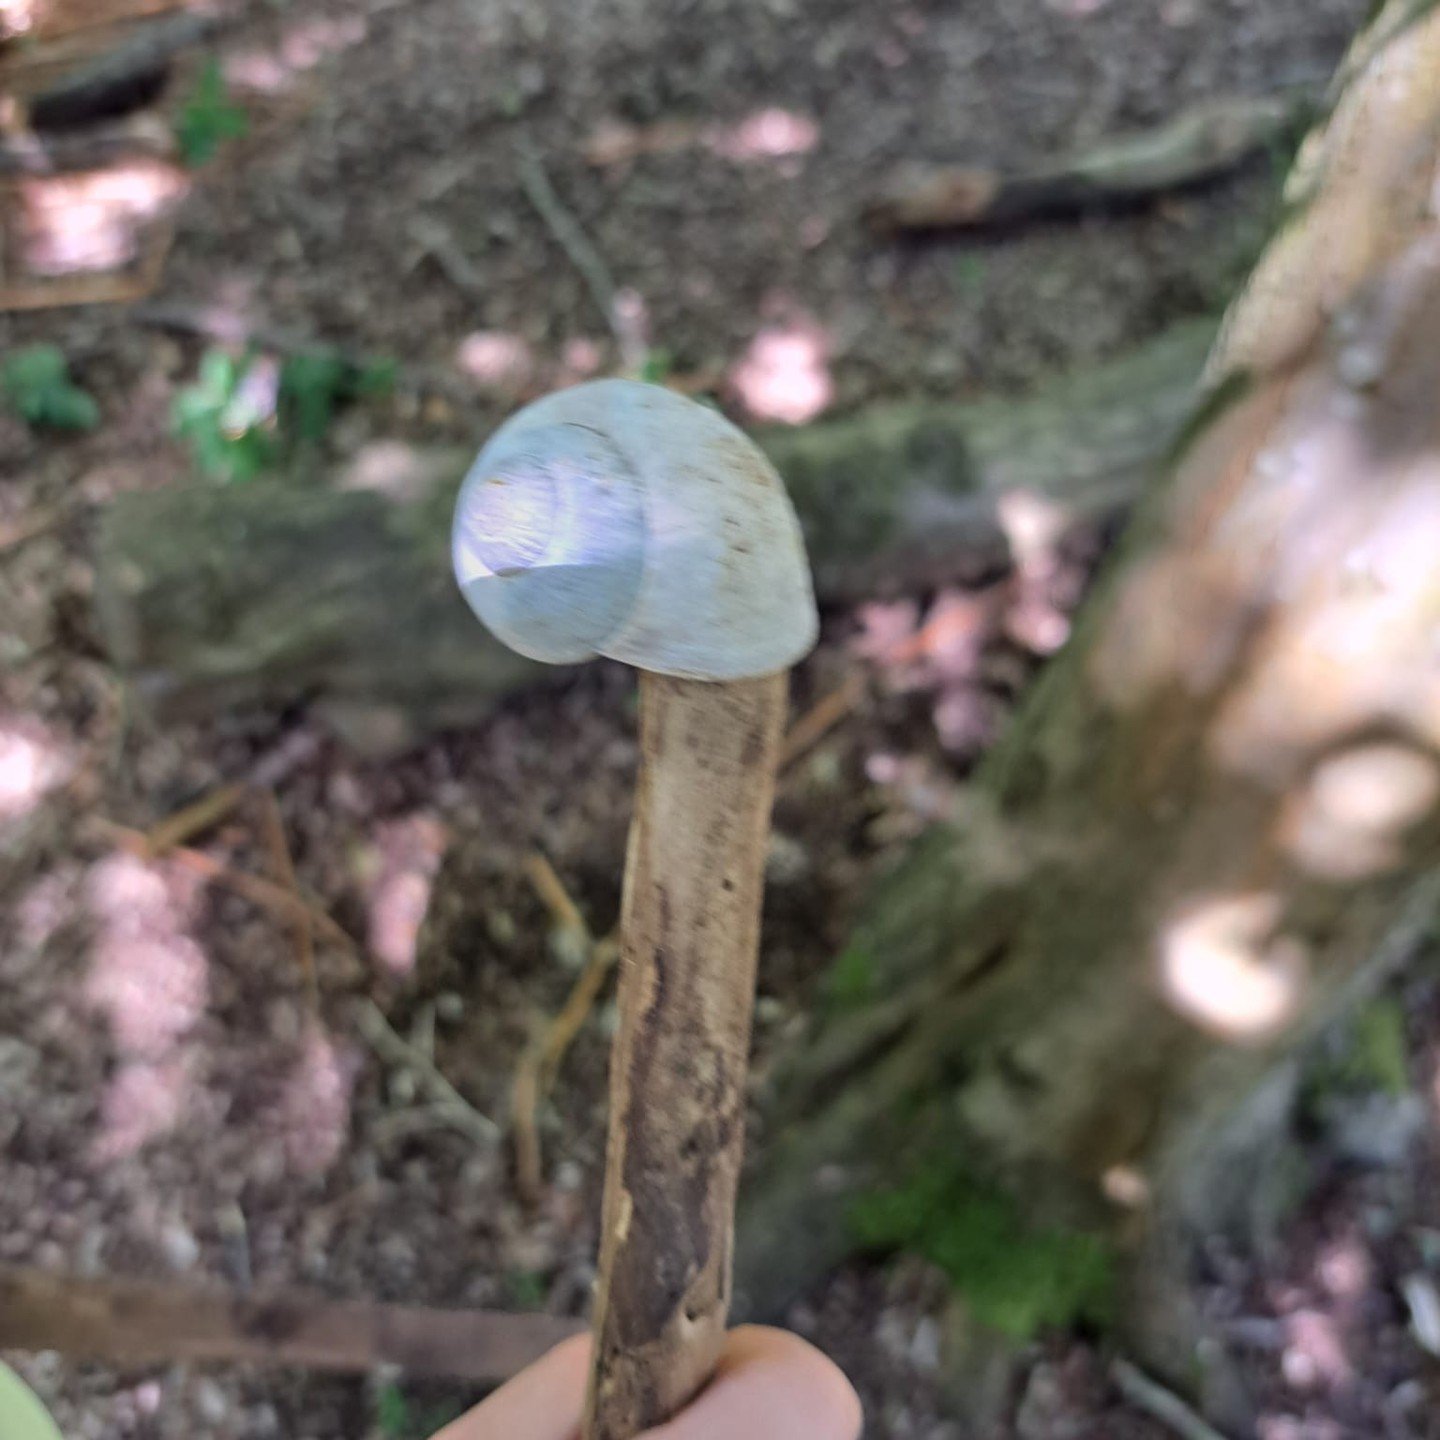 Beautiful day on the @woodhallestate today. This old snail shell became a marshmallow on a stick ready to be toasted on the pretend fire. #outdoorlearning